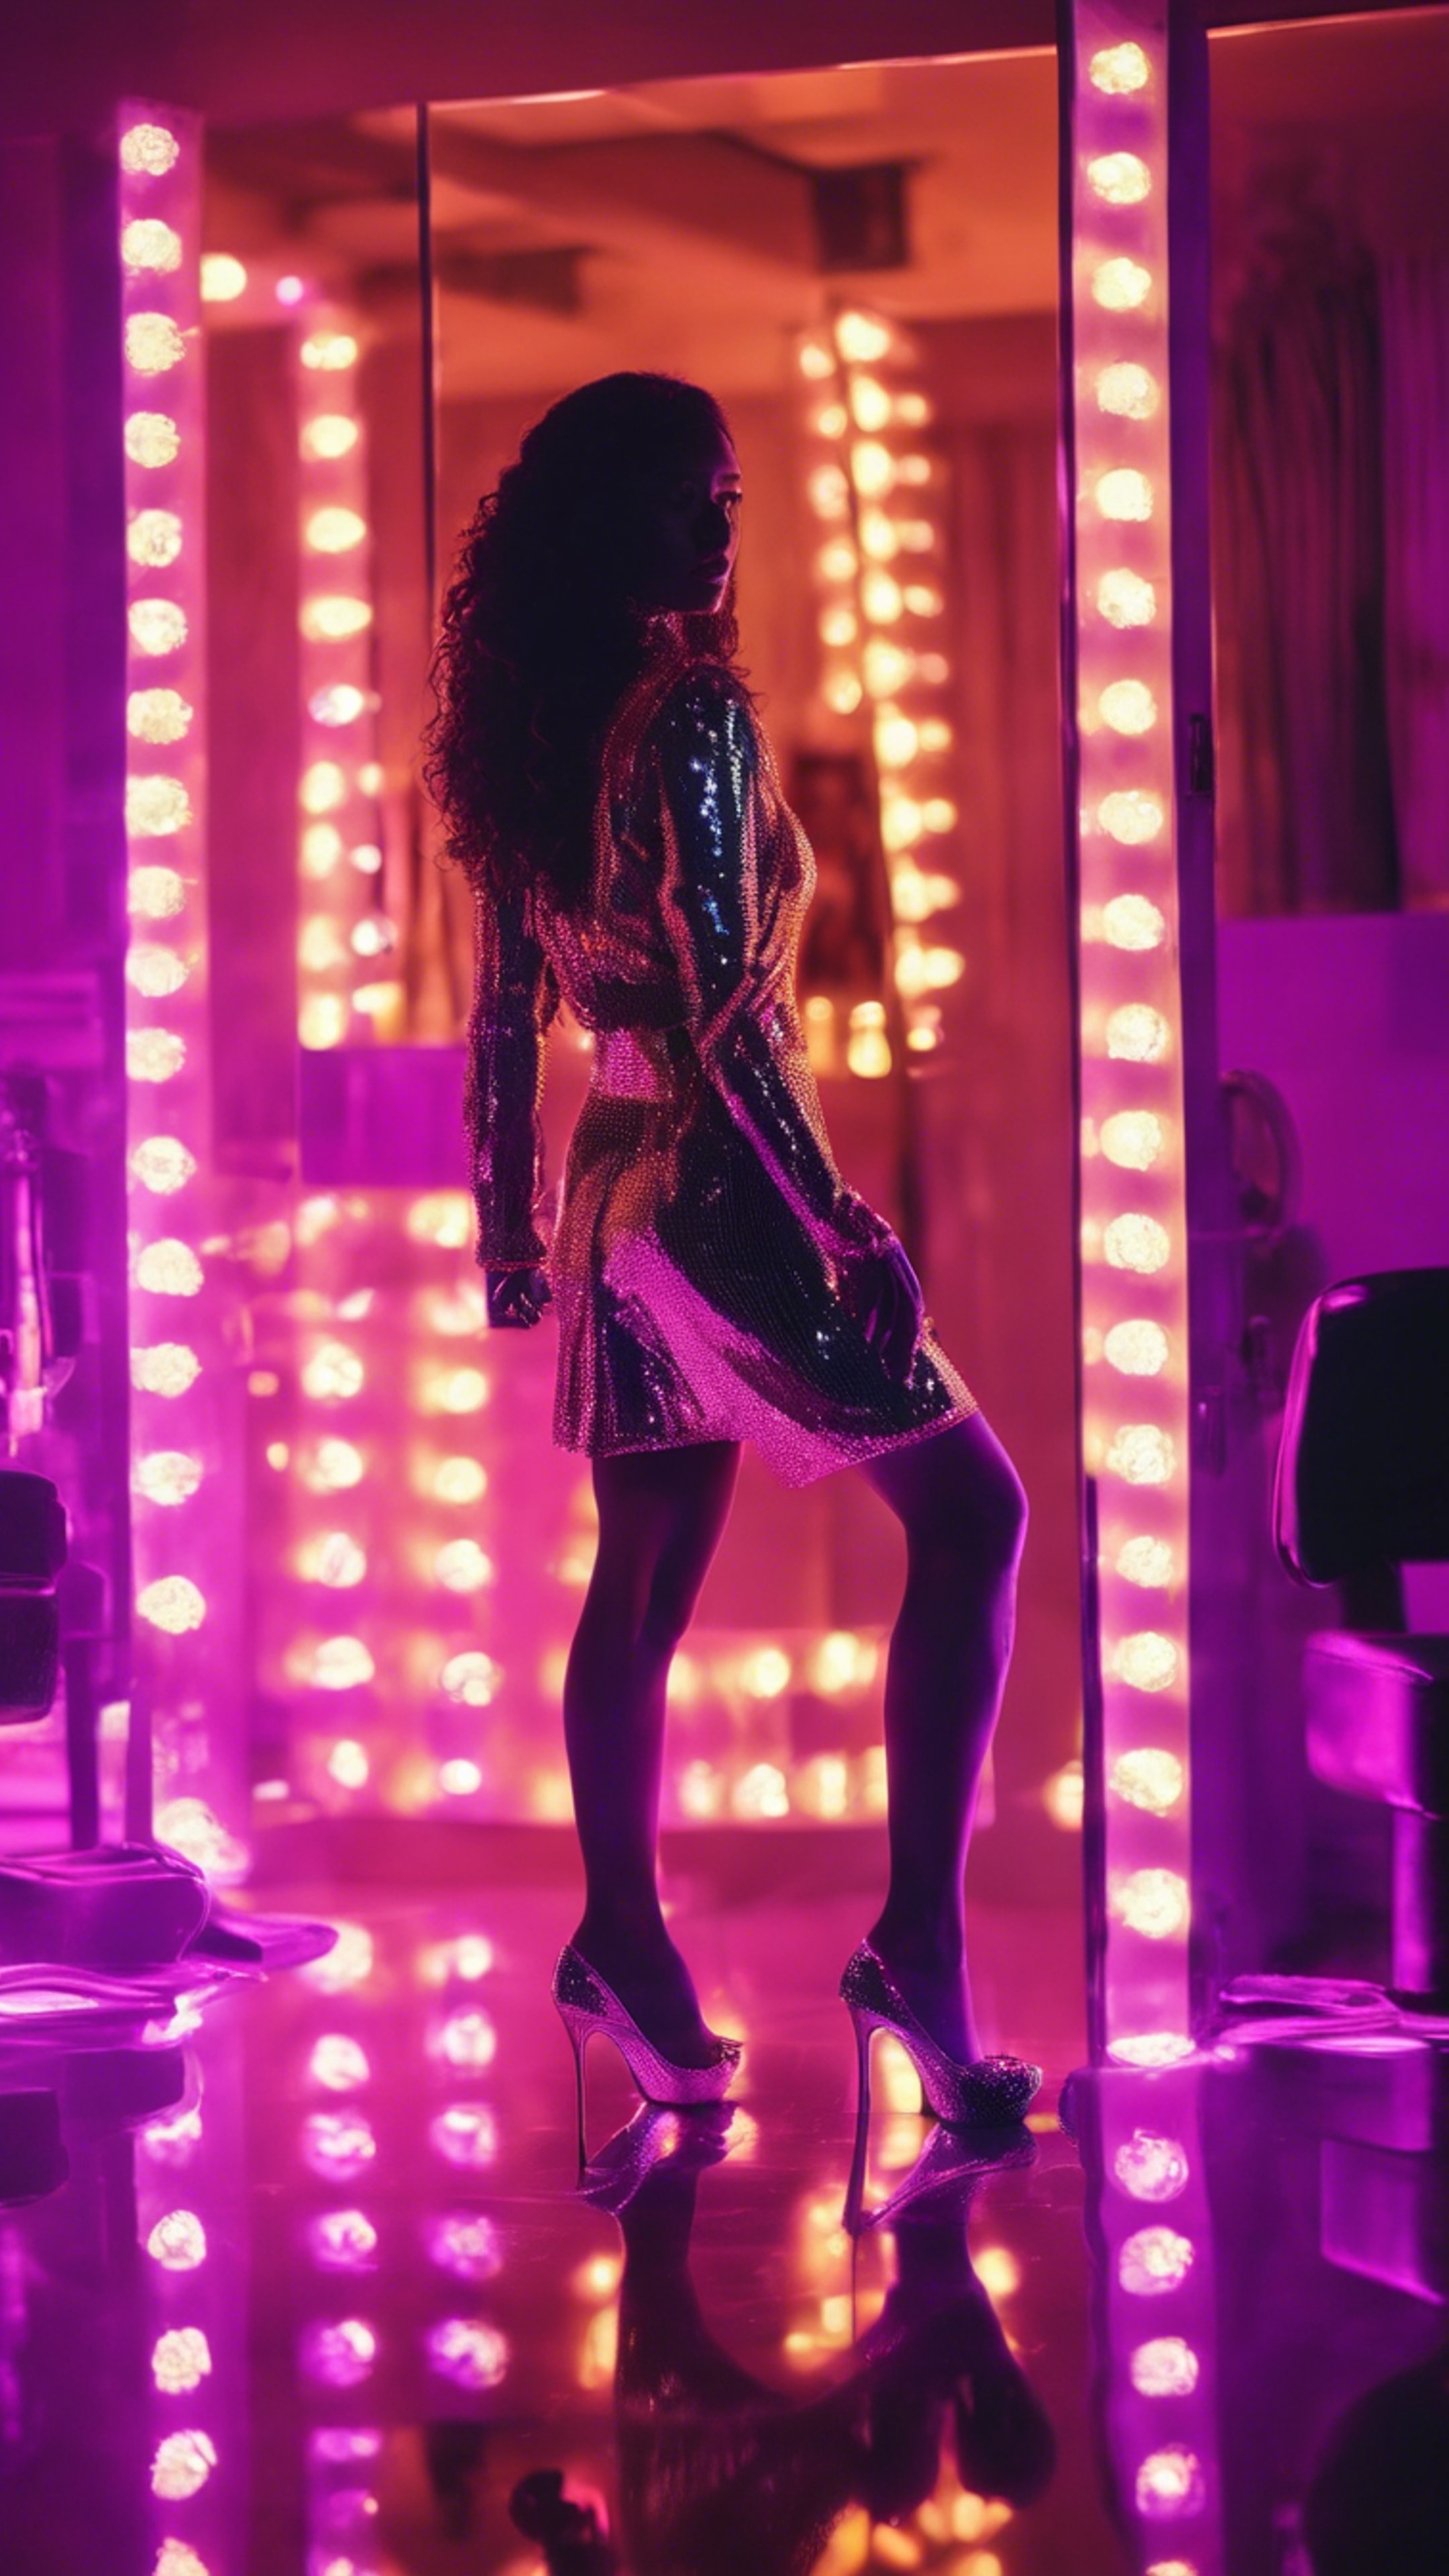 A confident baddie in a neon-lit room, dressed in sequins and high heels, her silhouette reflecting in the mirror. Валлпапер[dd190a8a8fd944b882f7]